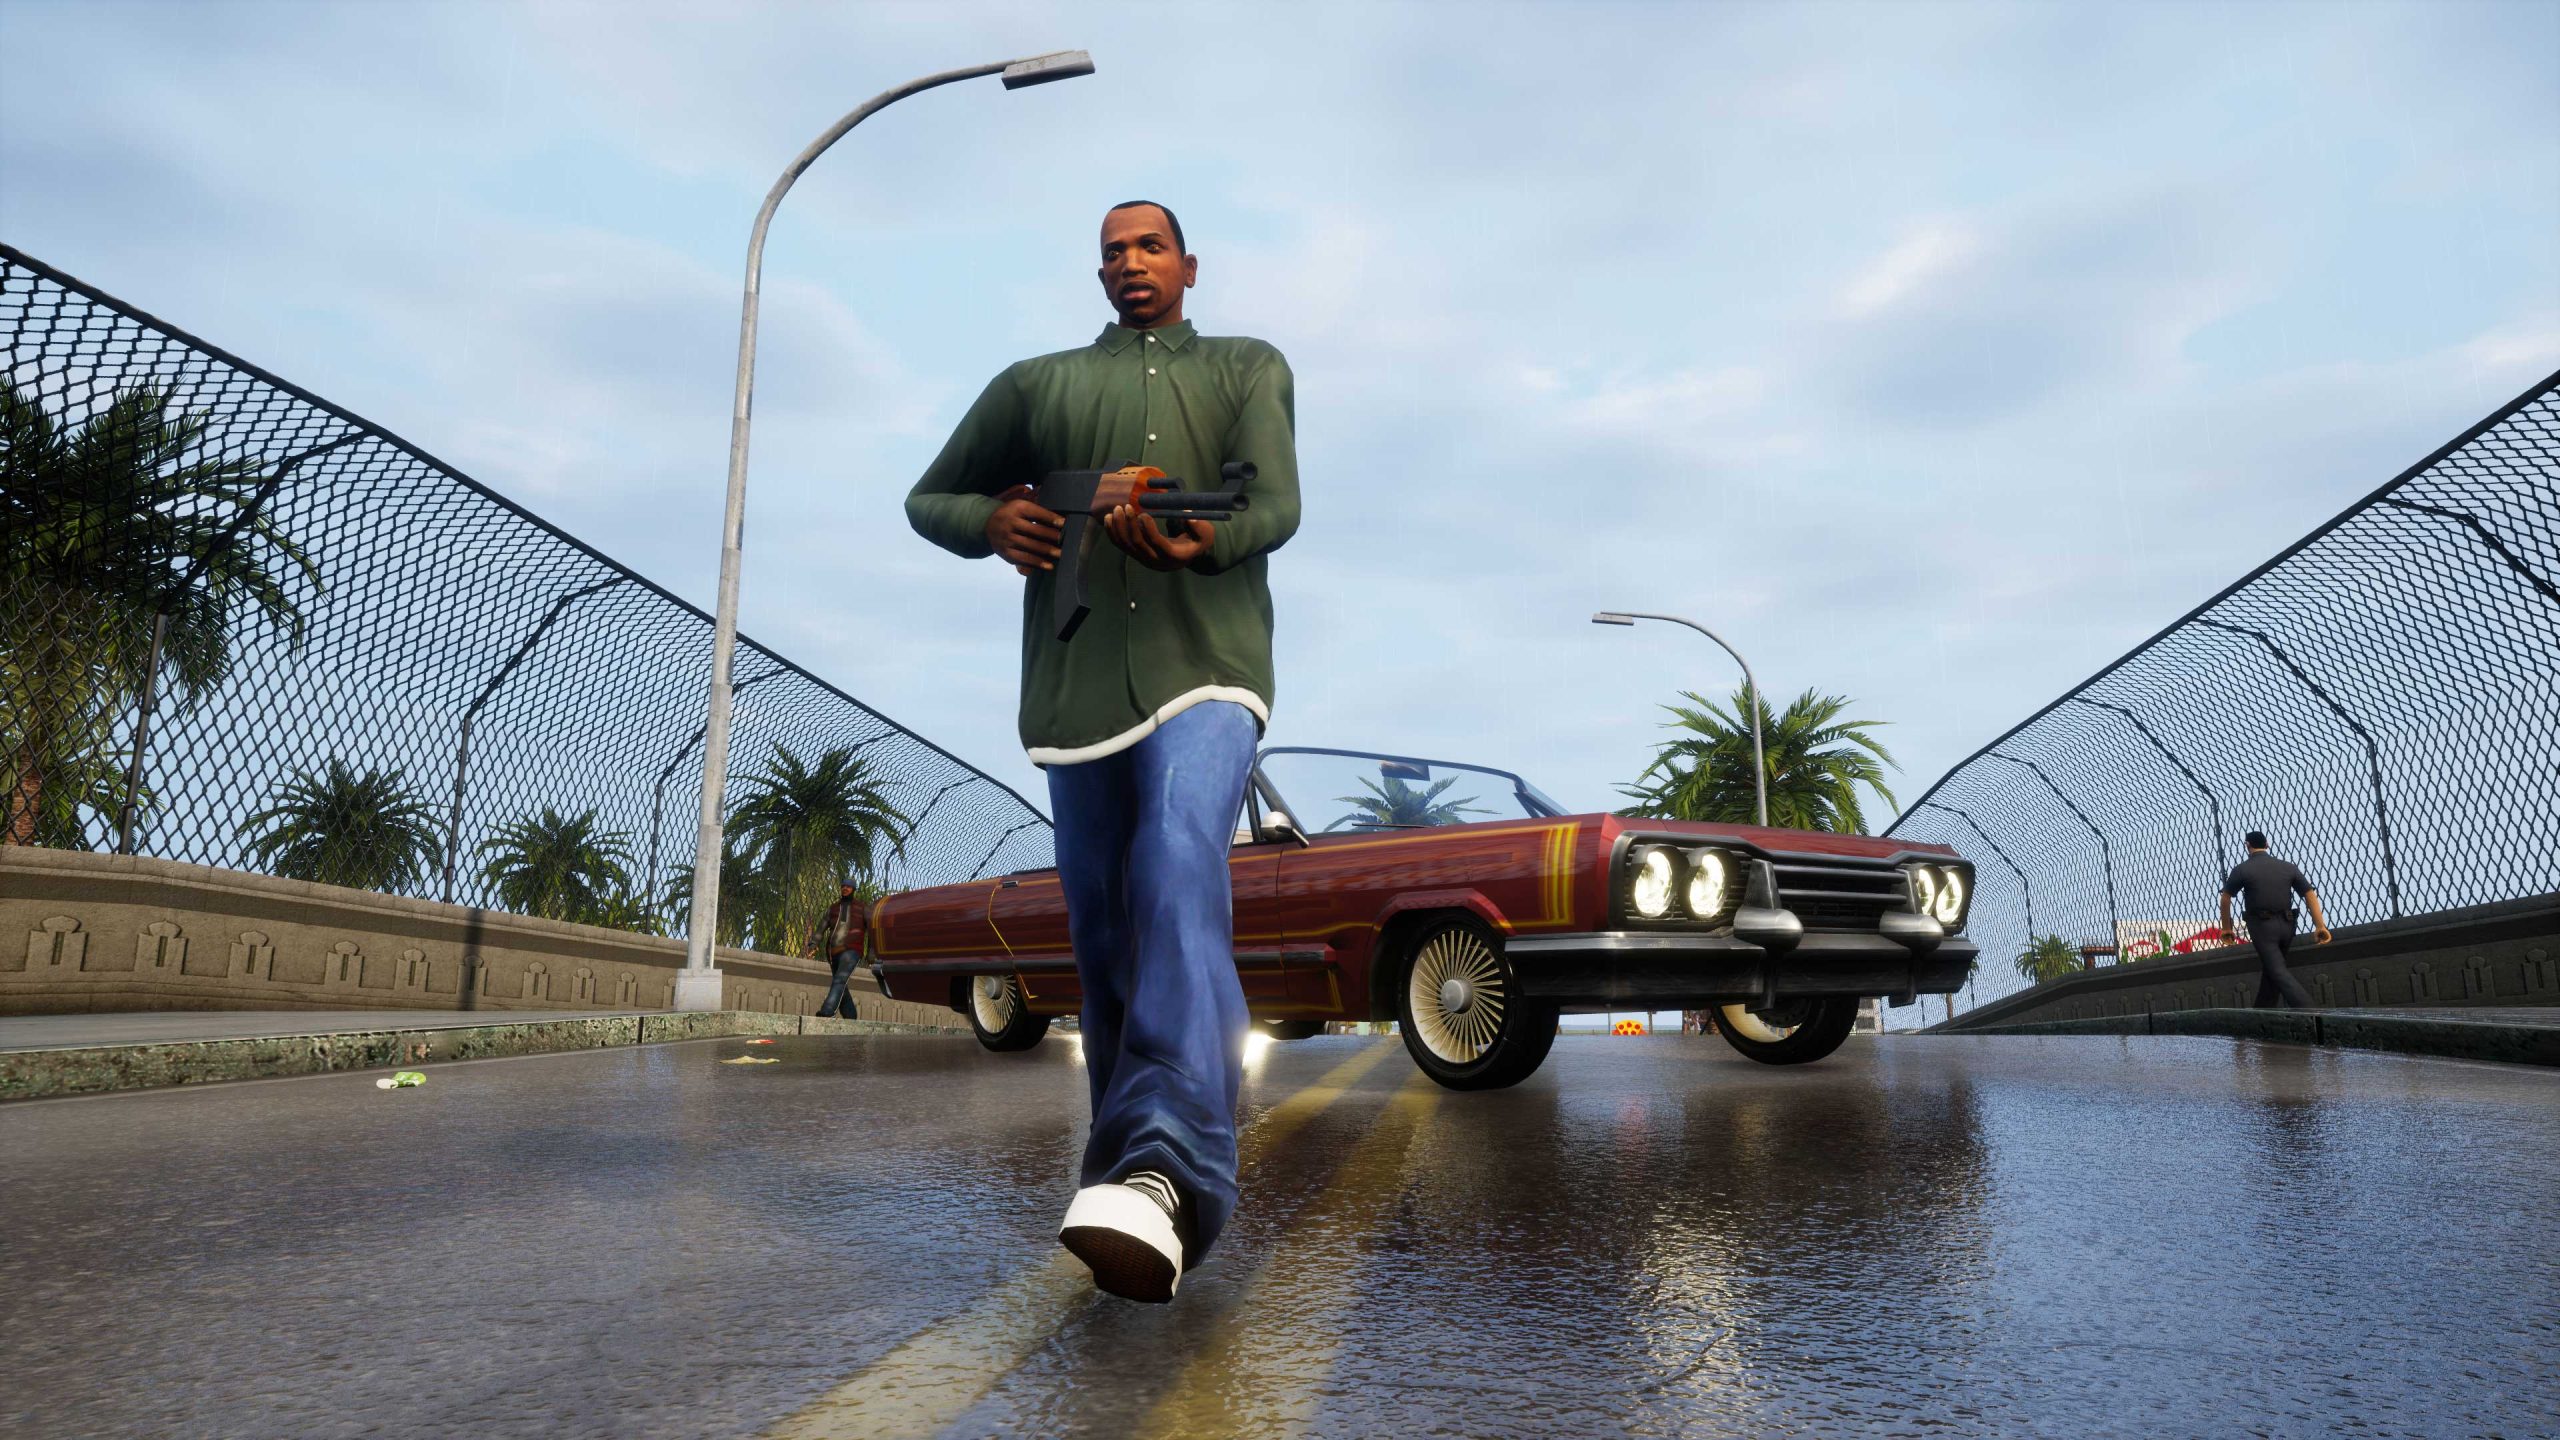 Grand Theft Auto: San Andreas Definitive Edition Graphics Analysis